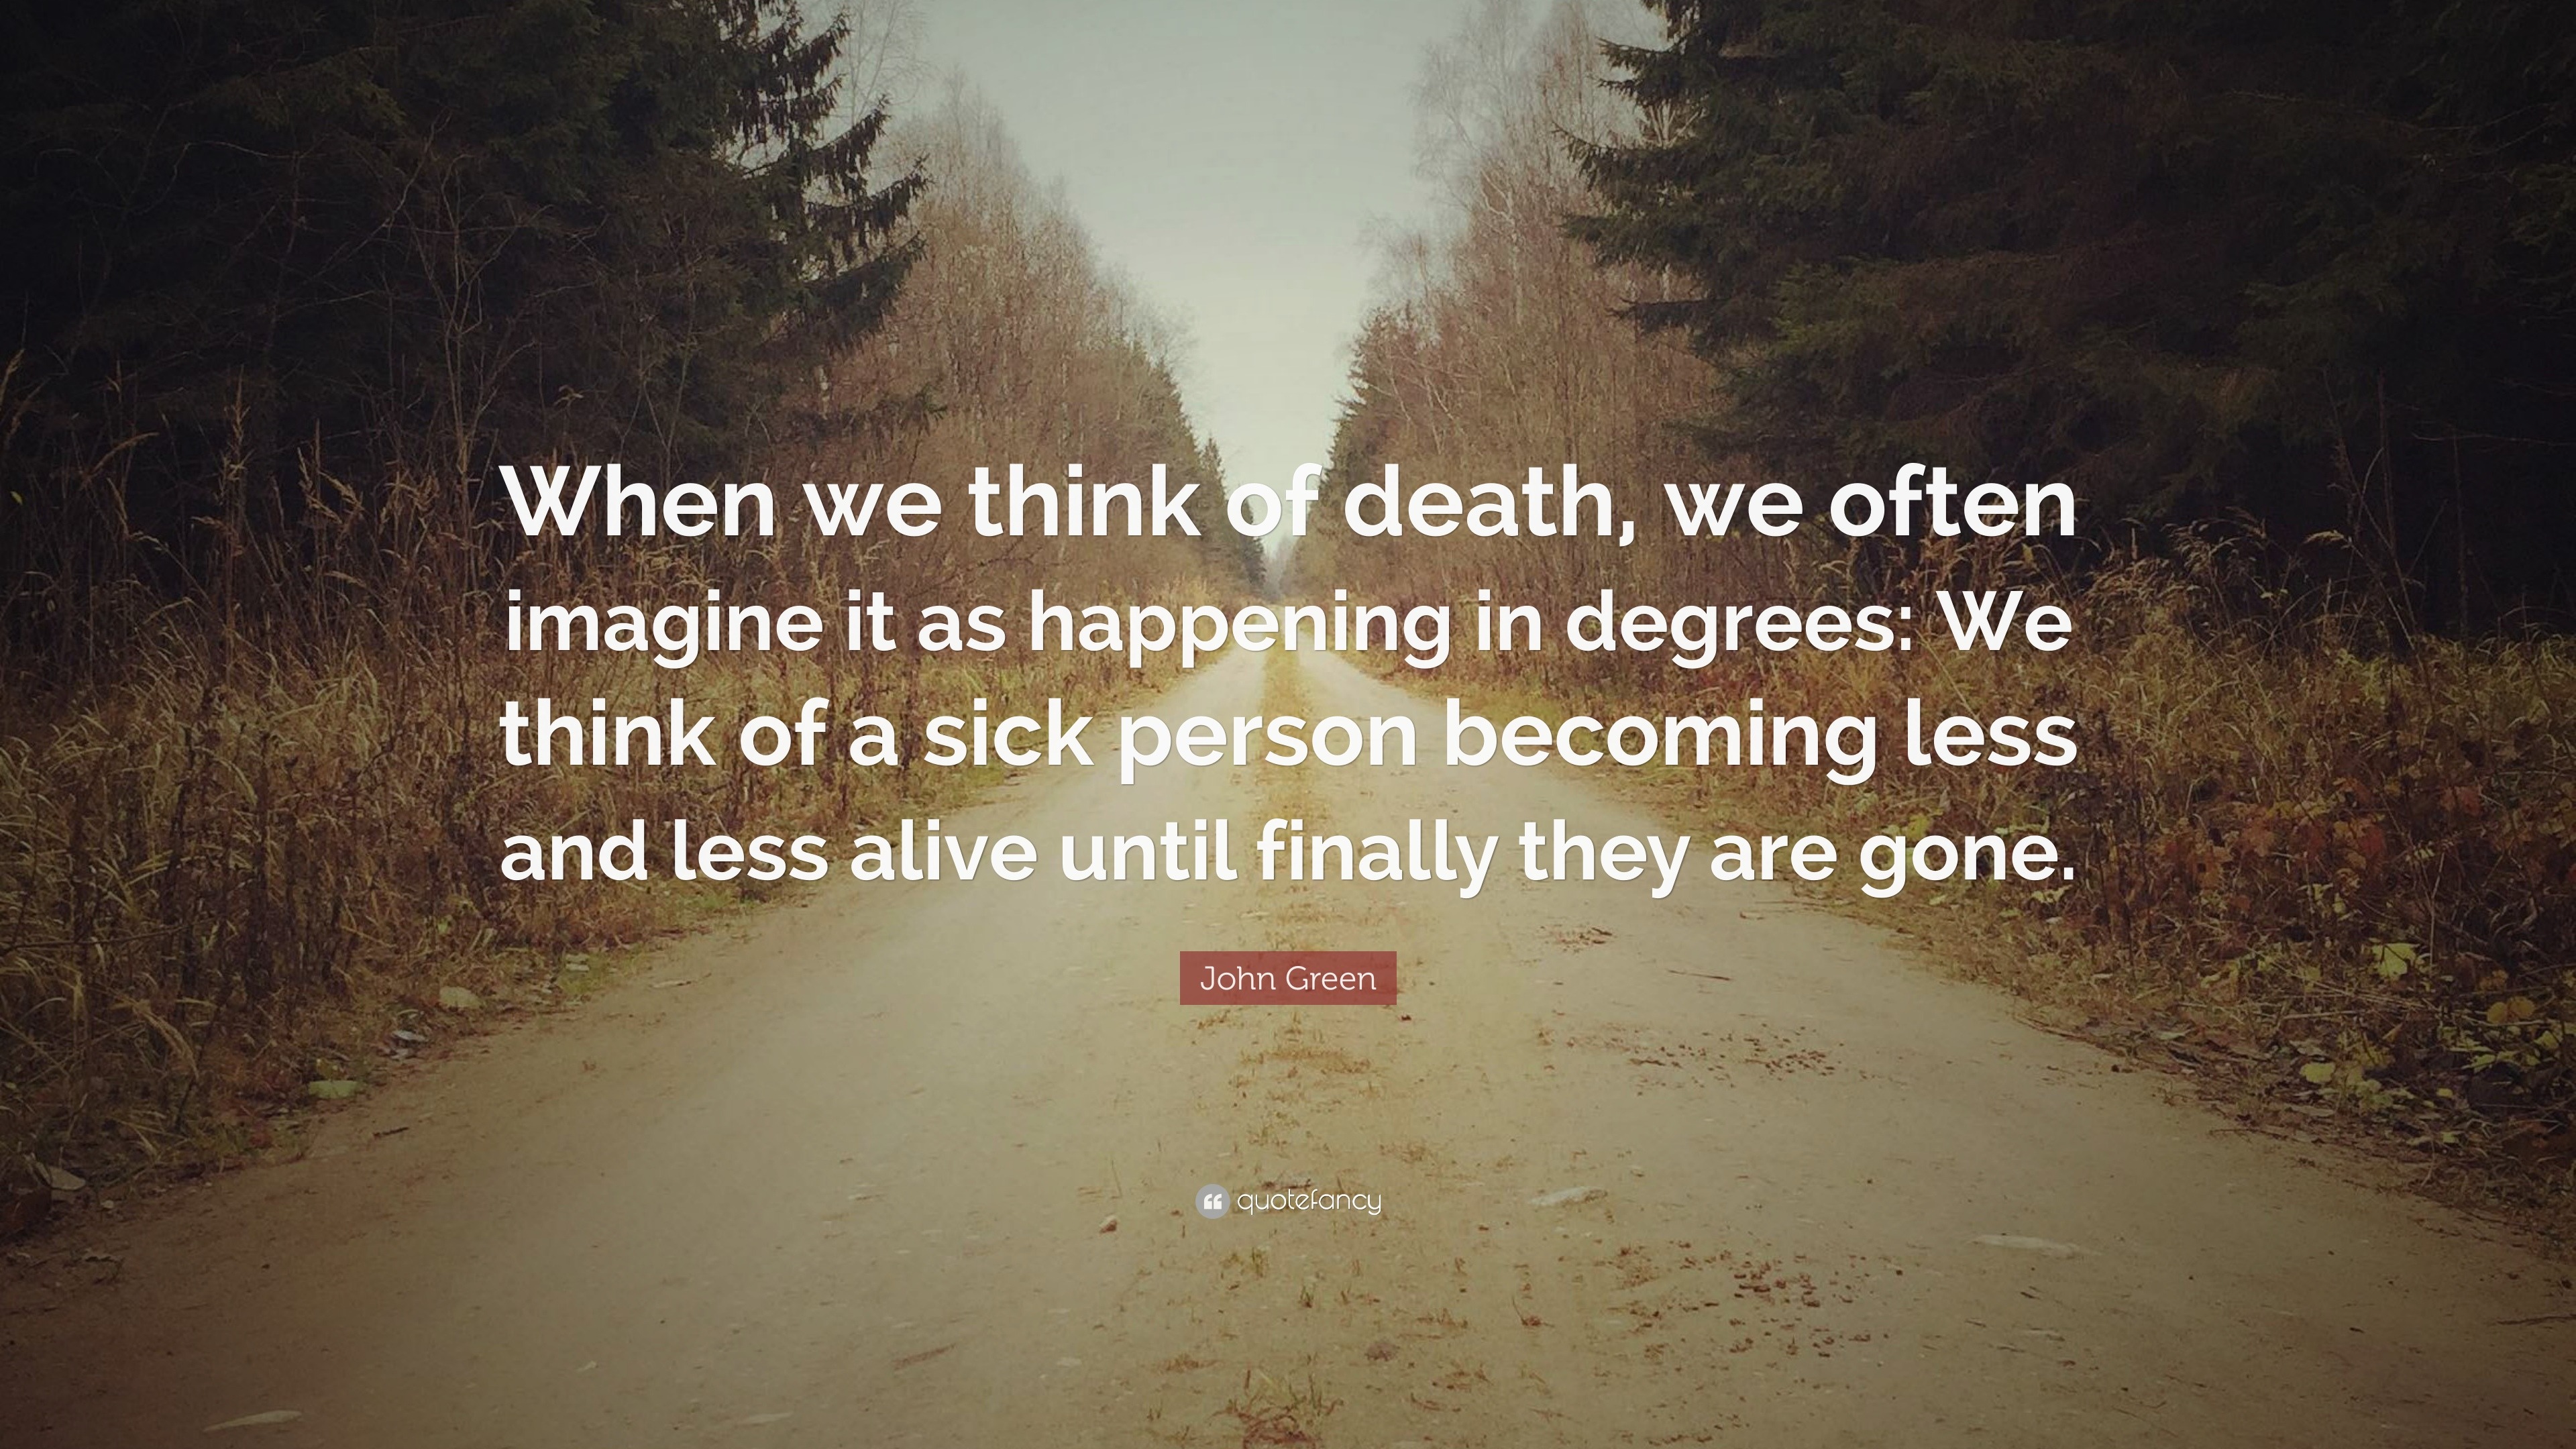 John Green Quote: “When we think of death, we often imagine it as ...